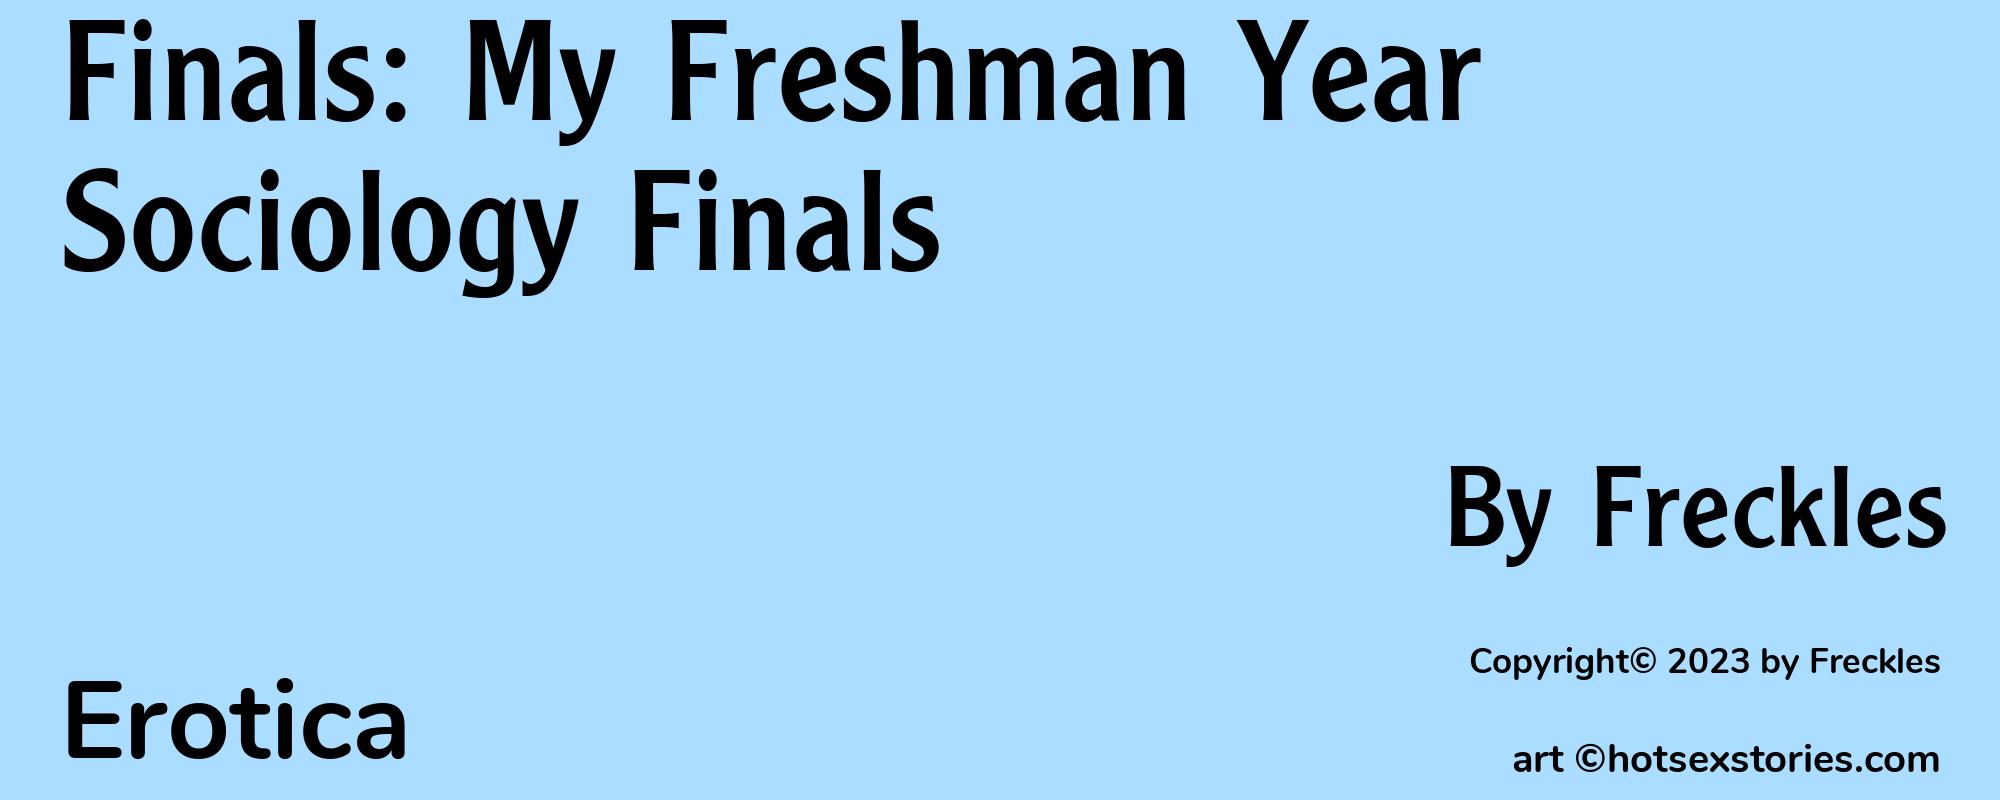 Finals: My Freshman Year Sociology Finals - Cover